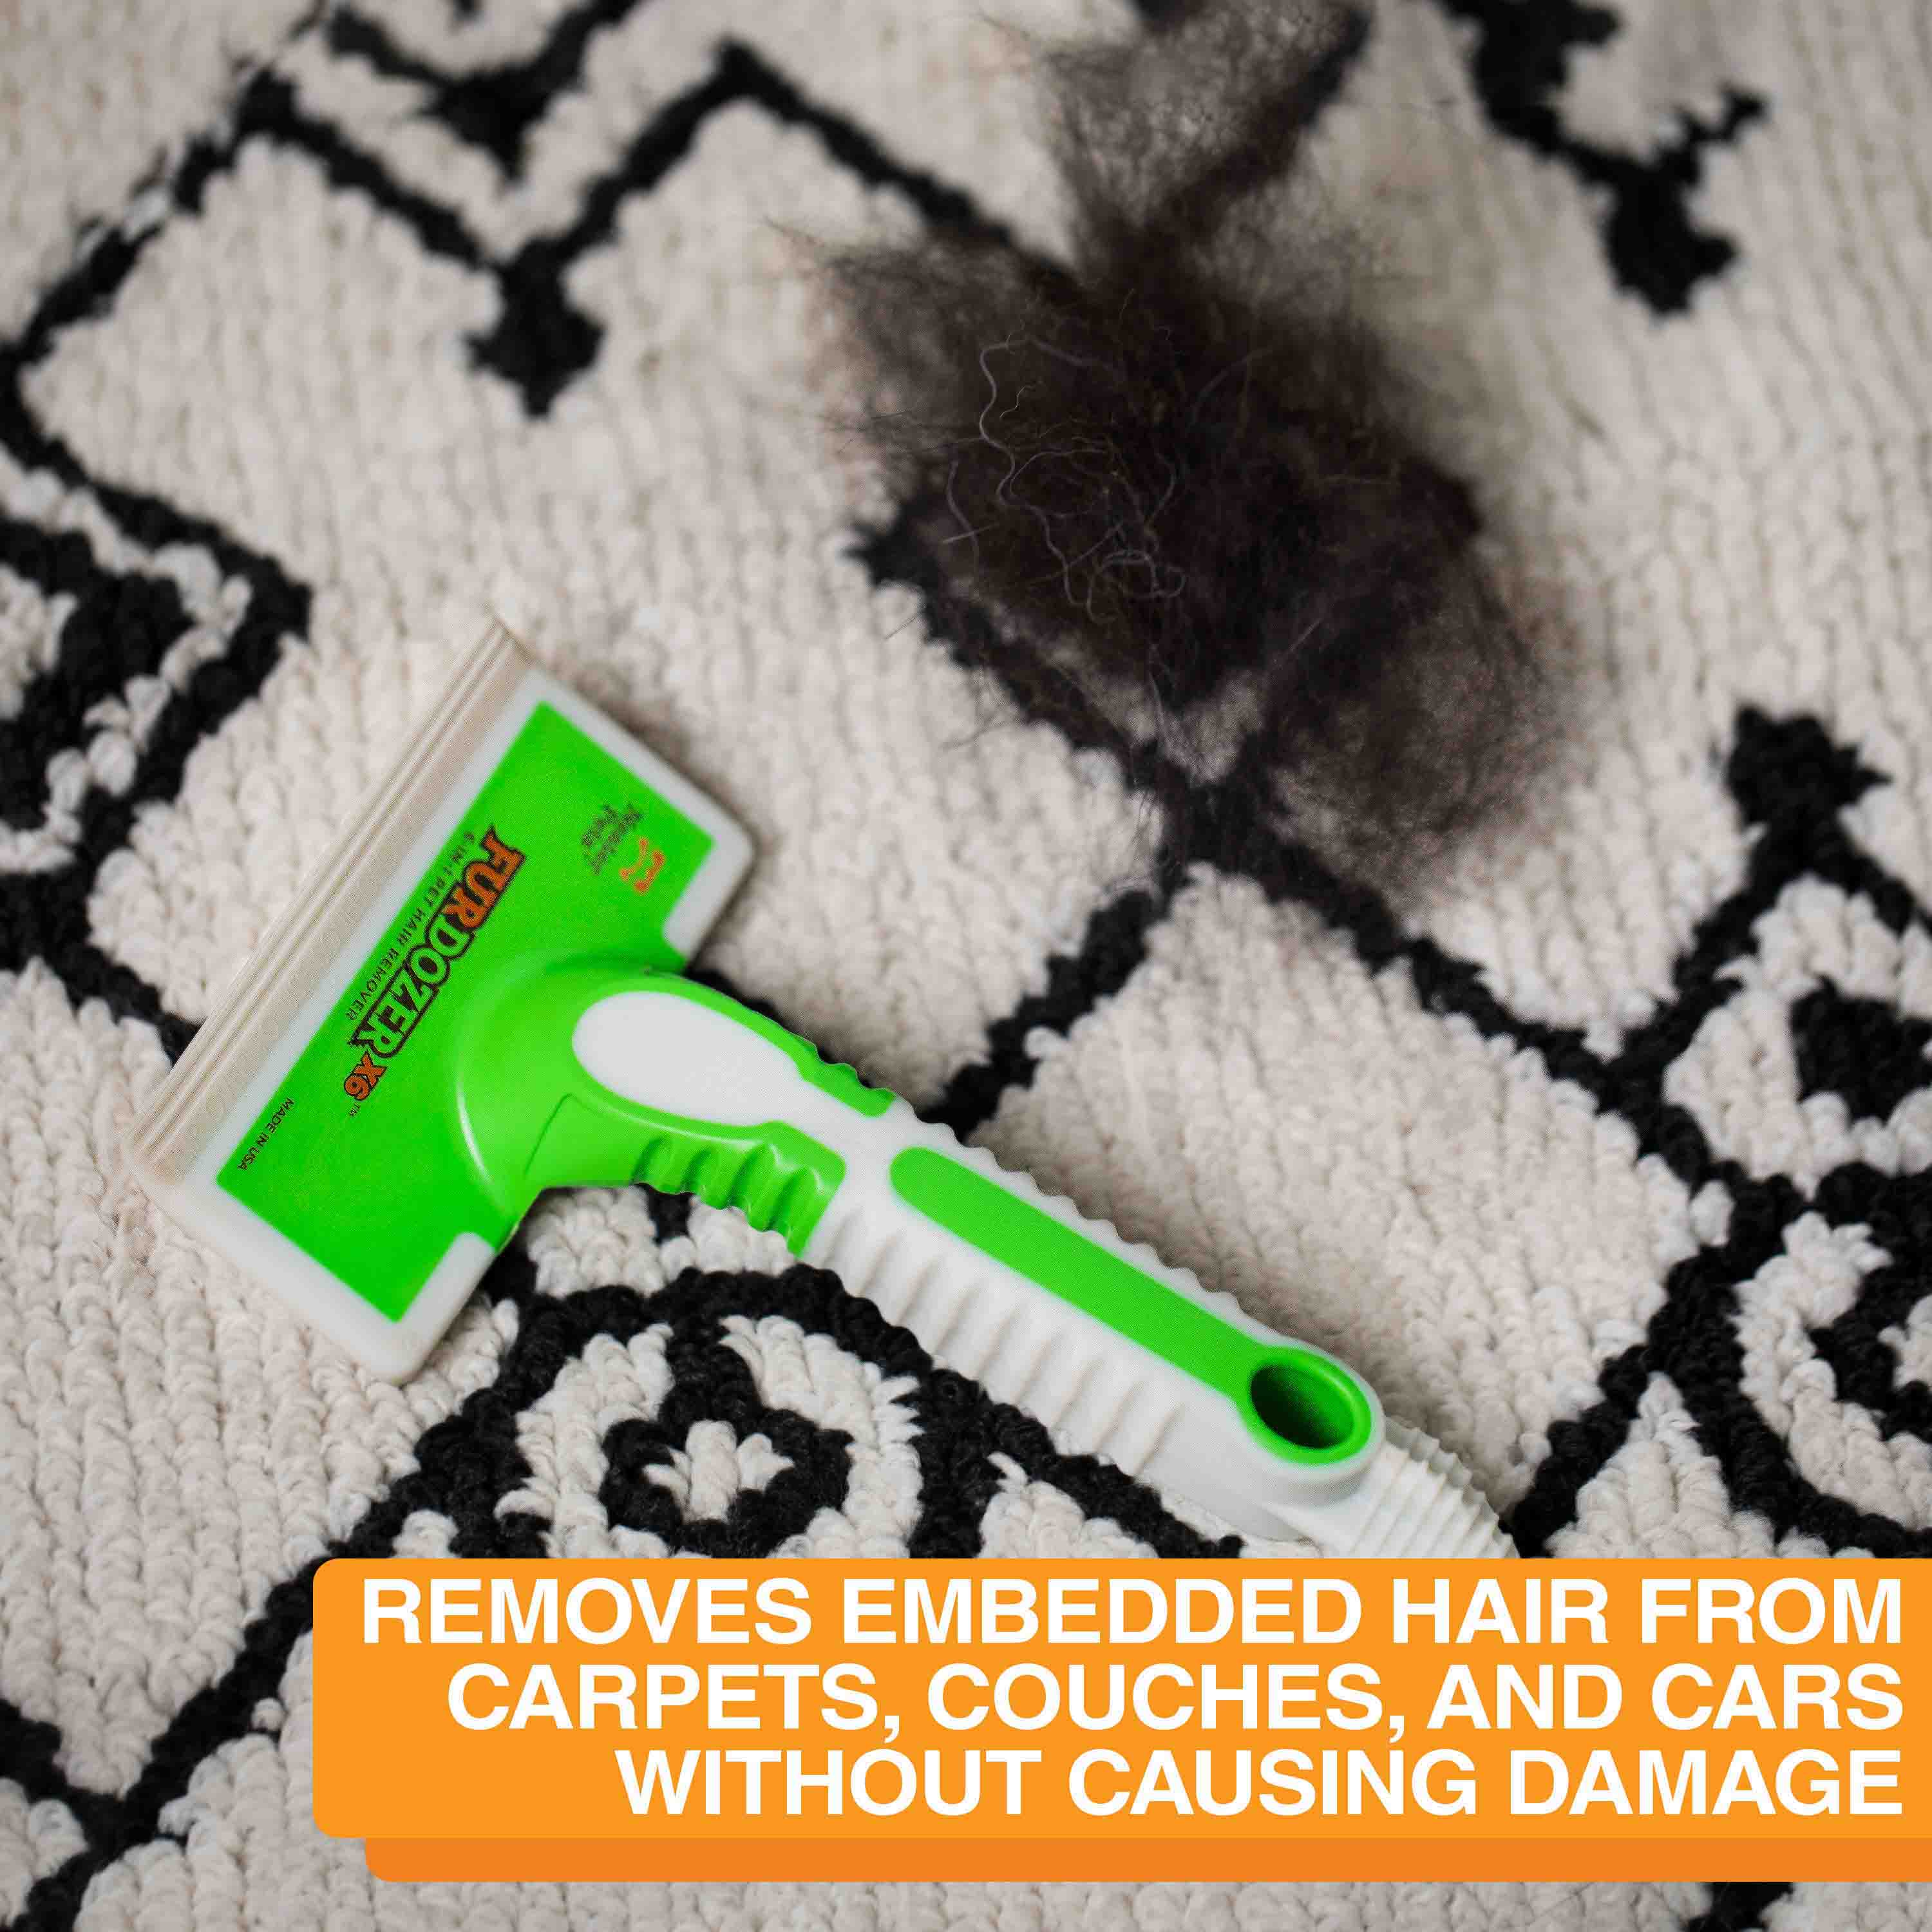 Removes embedded hair from carpets, couches, and cars